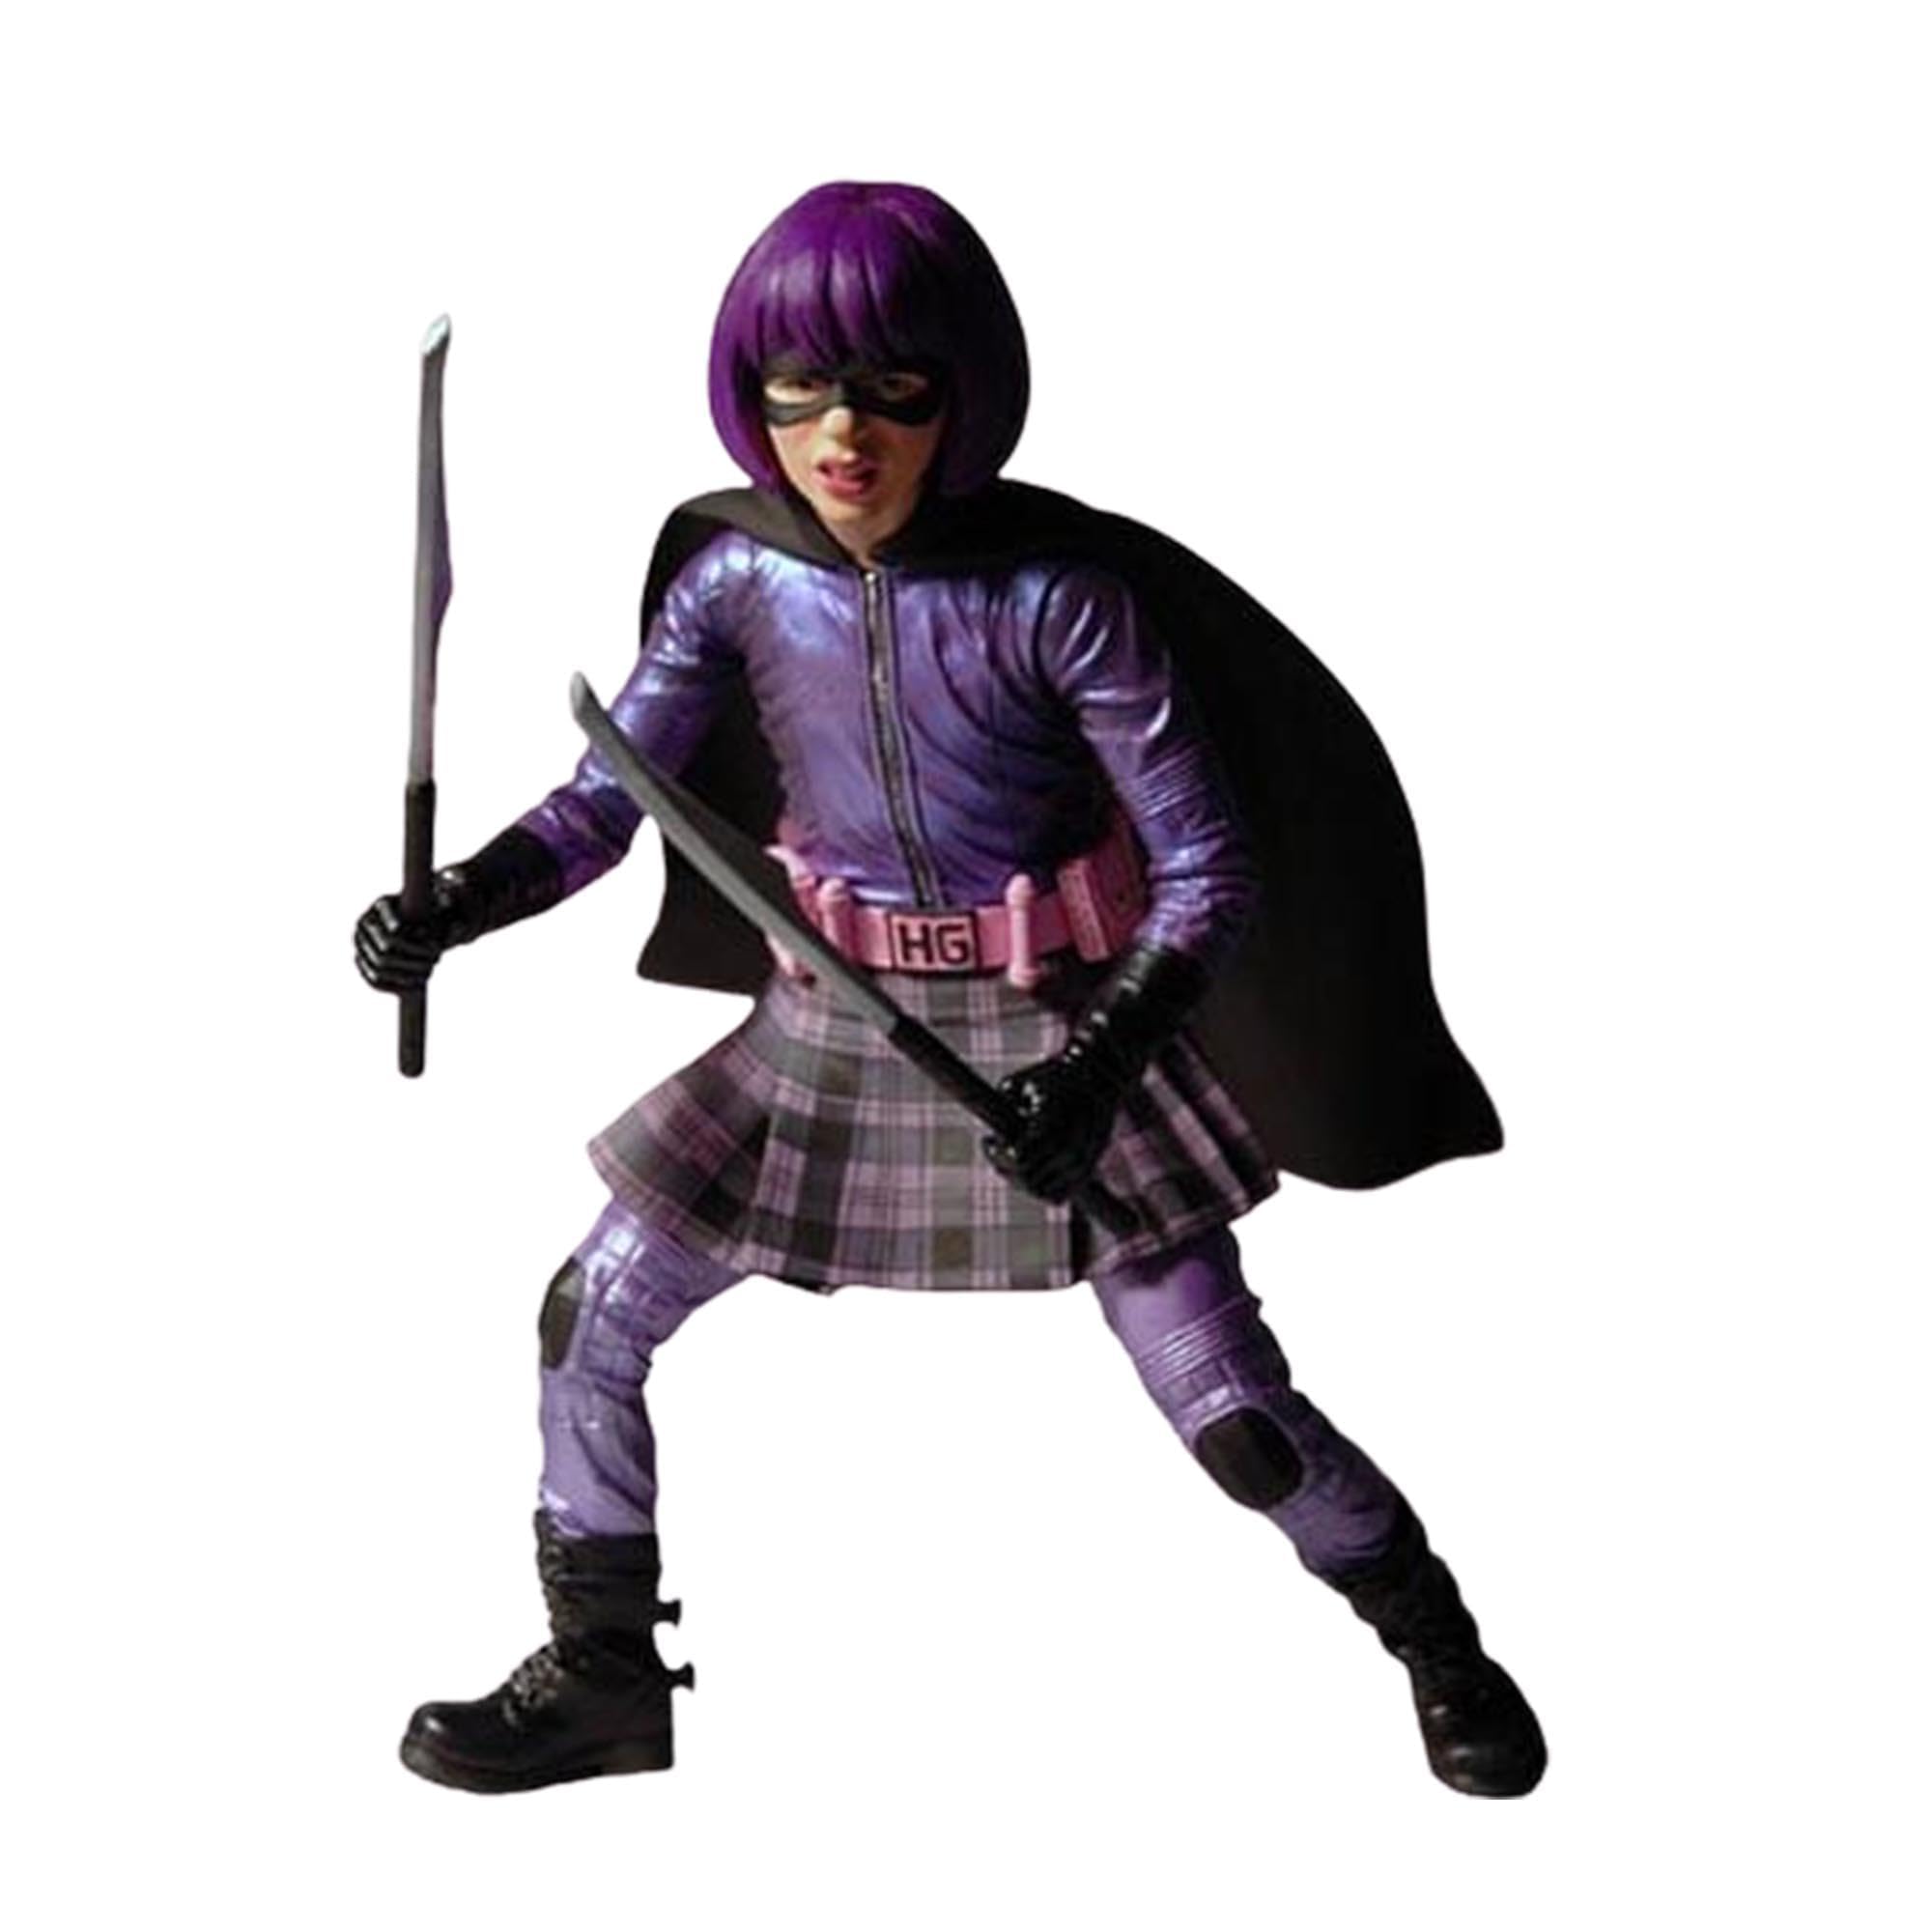 Kickass mezco toyz inch action figure hit girl includes swords butterfly knife toys games